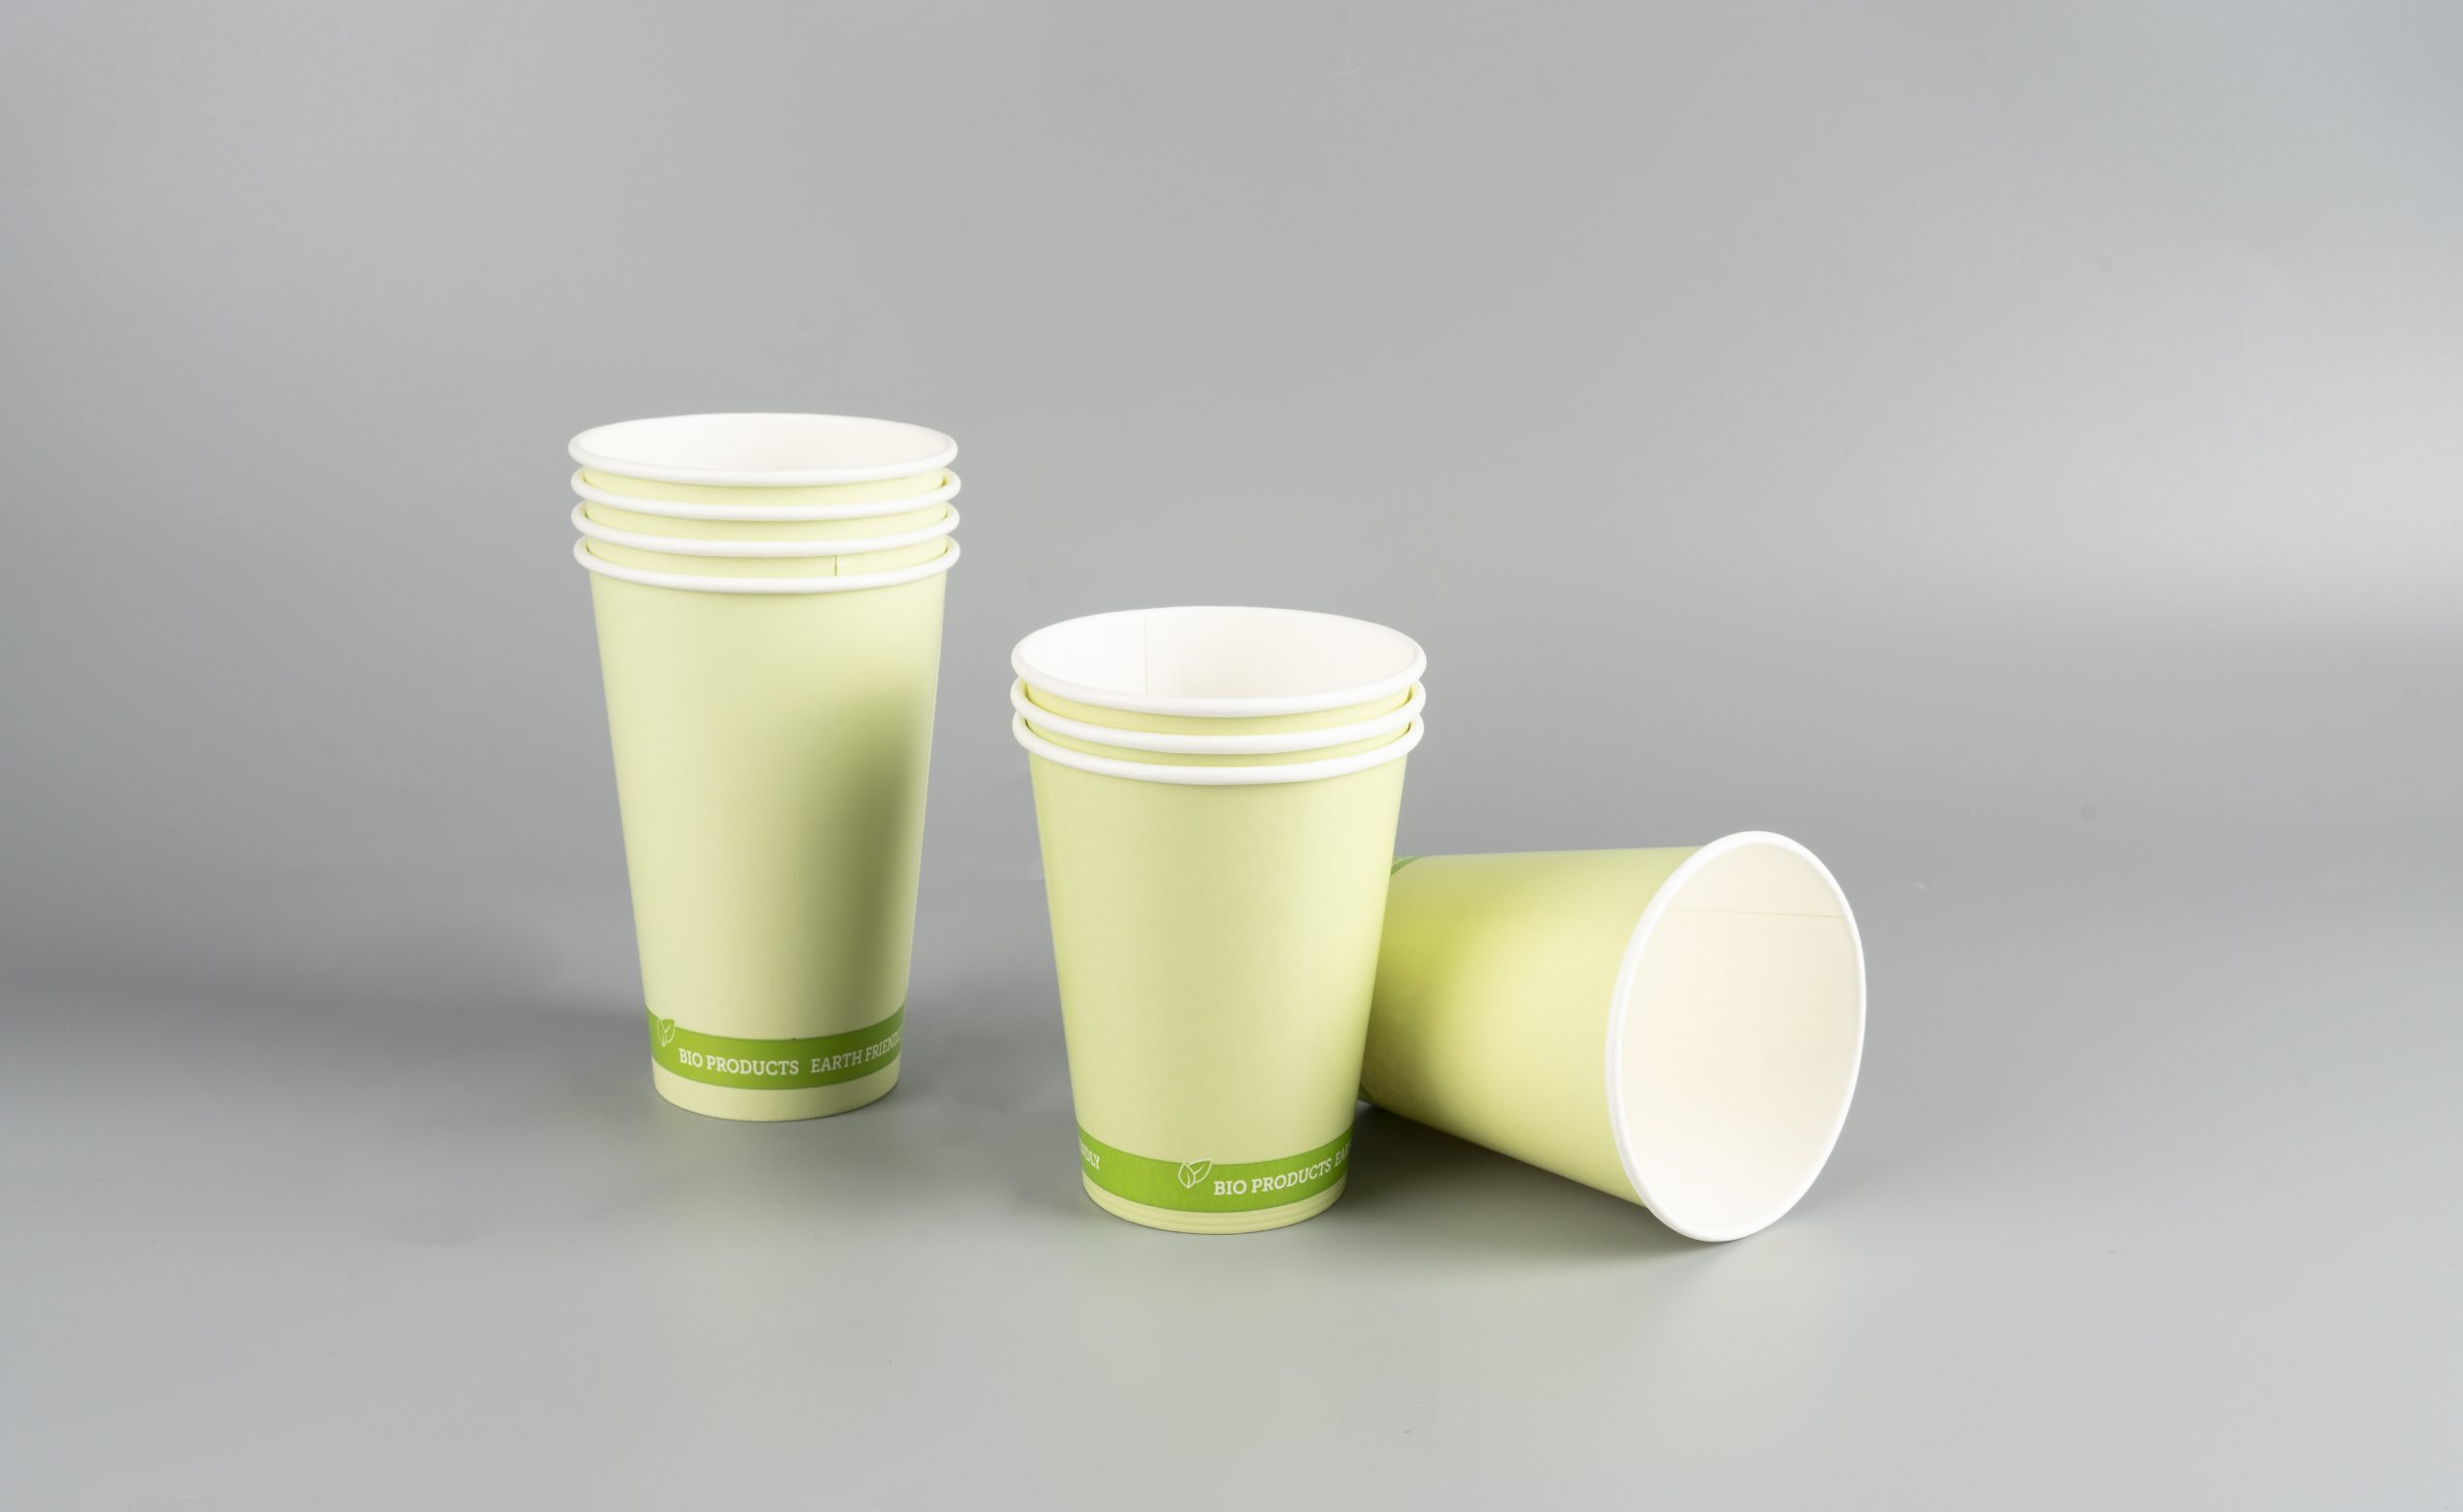 Can PLA Cups Be 100% Compostable Or Break Down Into Massive Microplastics?